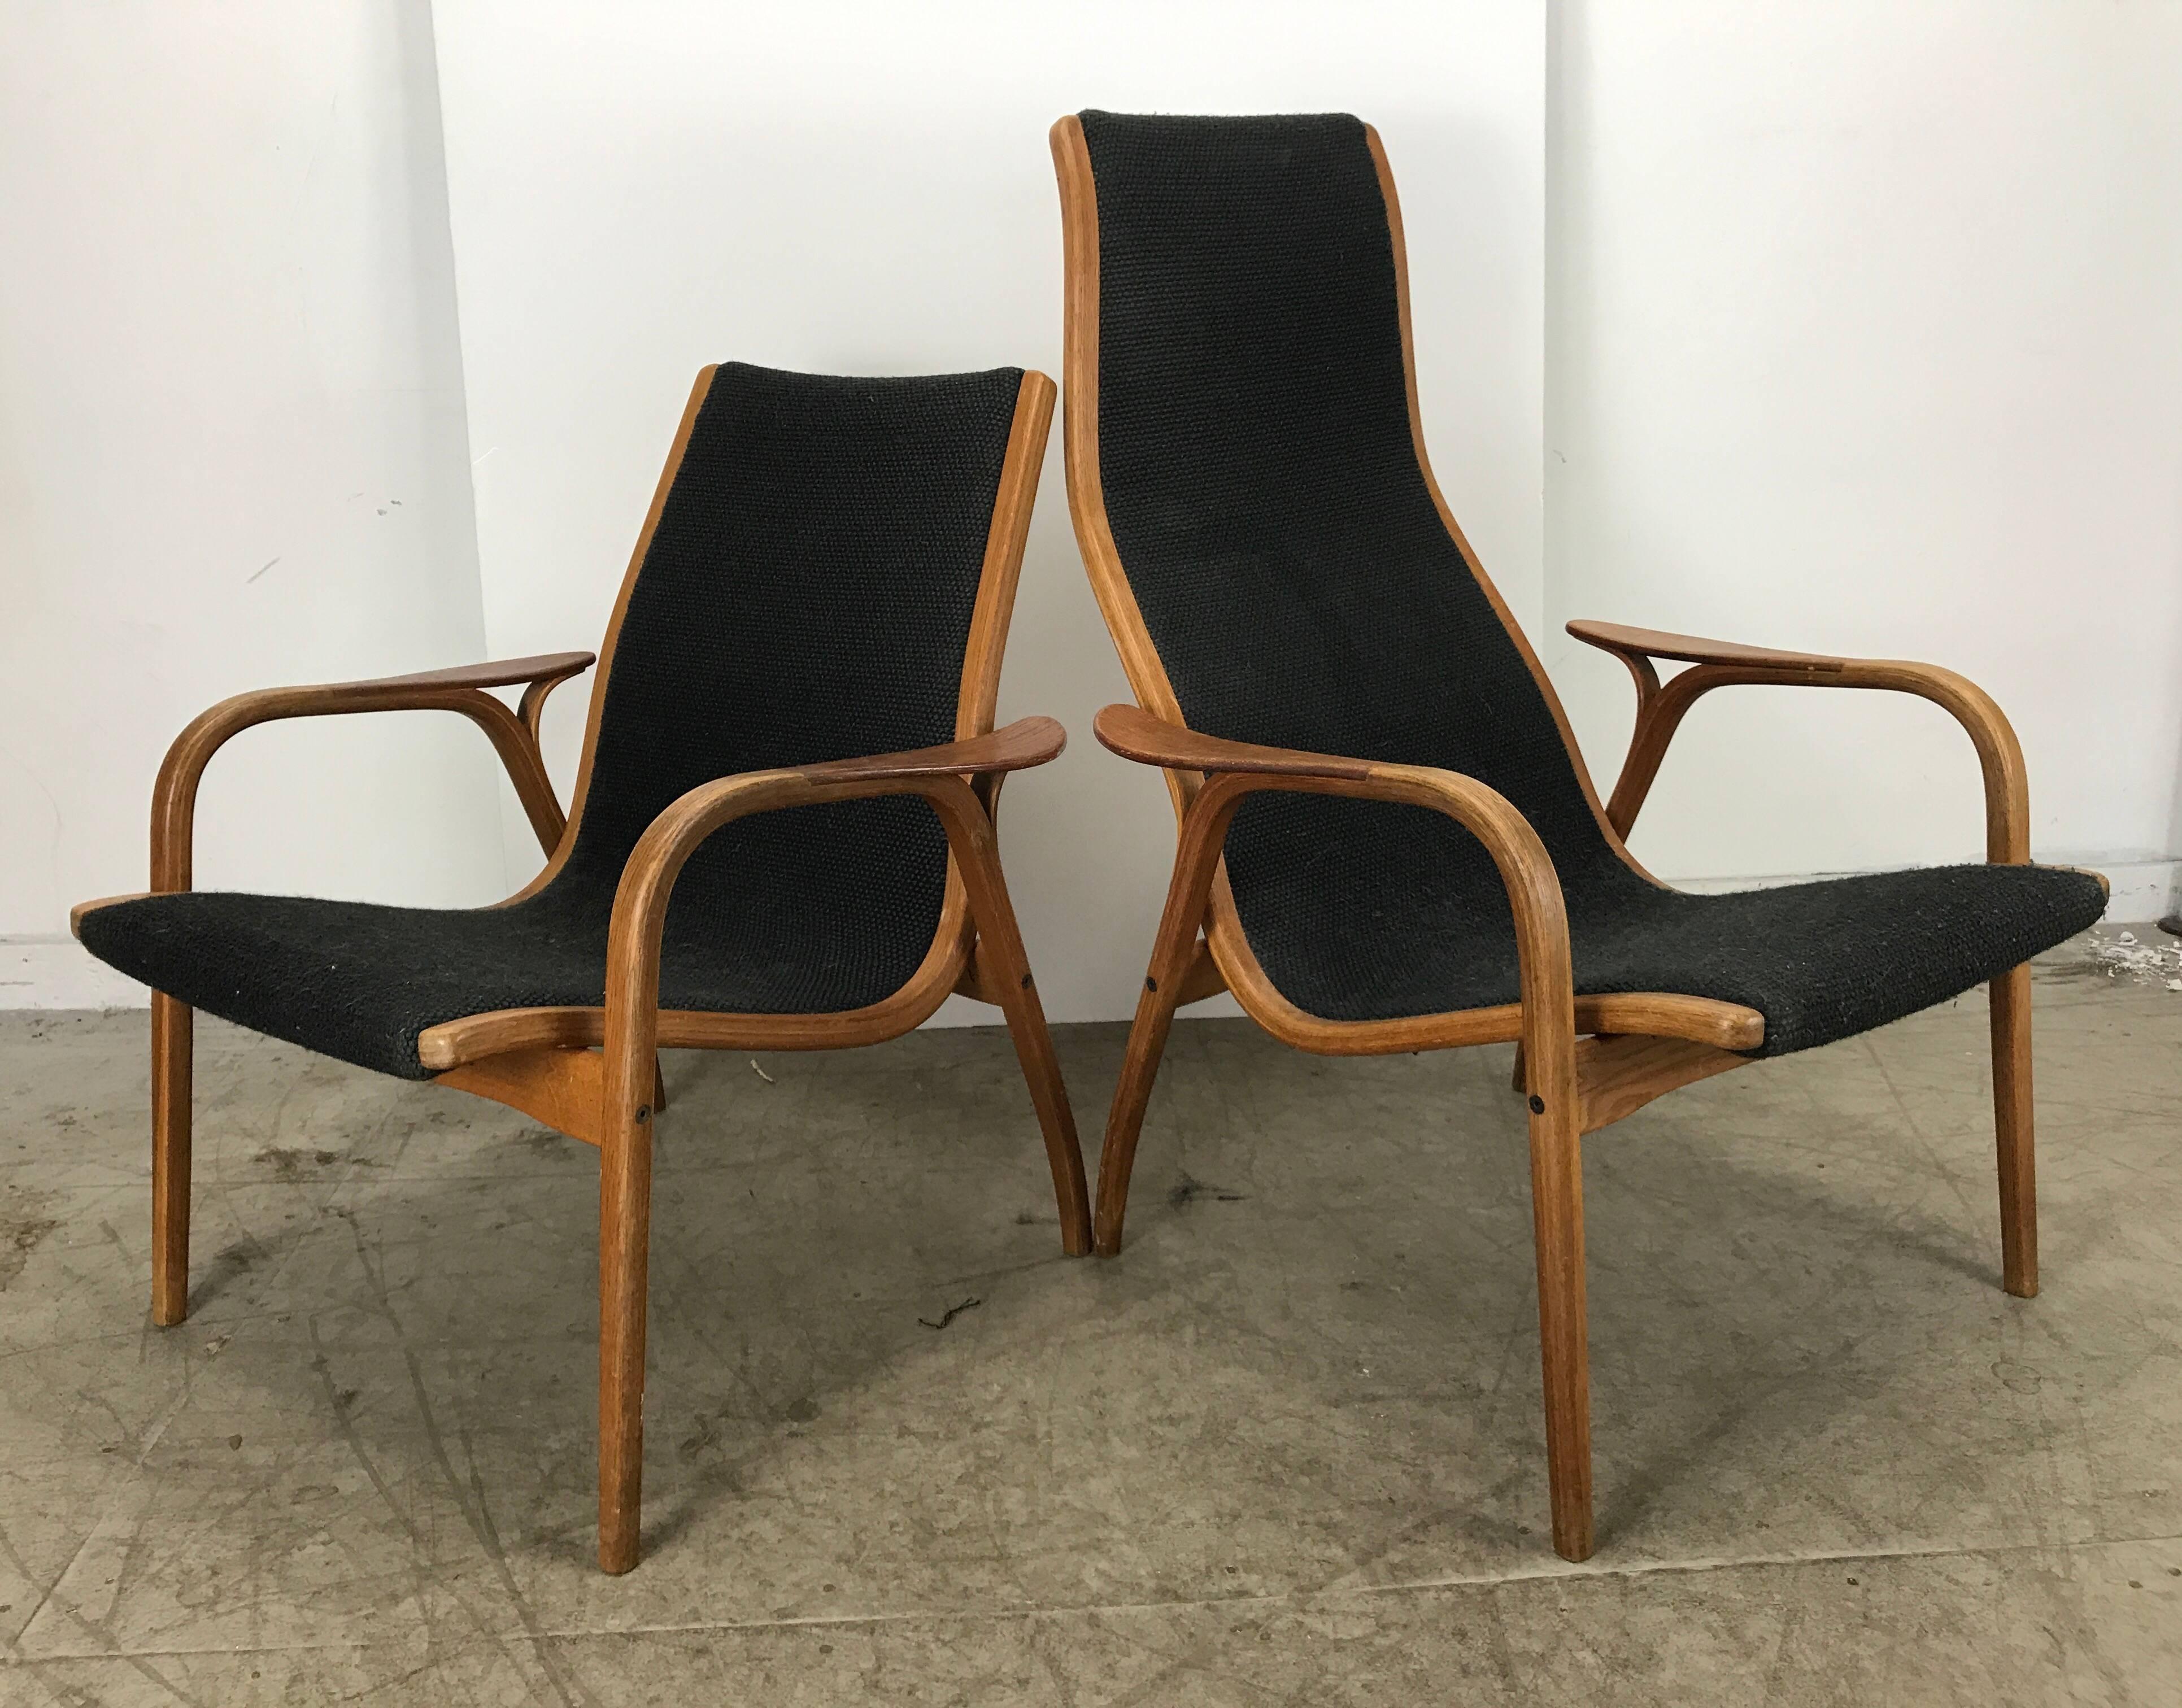 Sleek and stylish His and Hers Scandinavian modern Lamino chair and ottoman designed by Yngve Ekström for Swedese, circa 1960s. The chair features a unique sculptural bentwood design. Using both oak and teak, It is very light weight but sturdy and